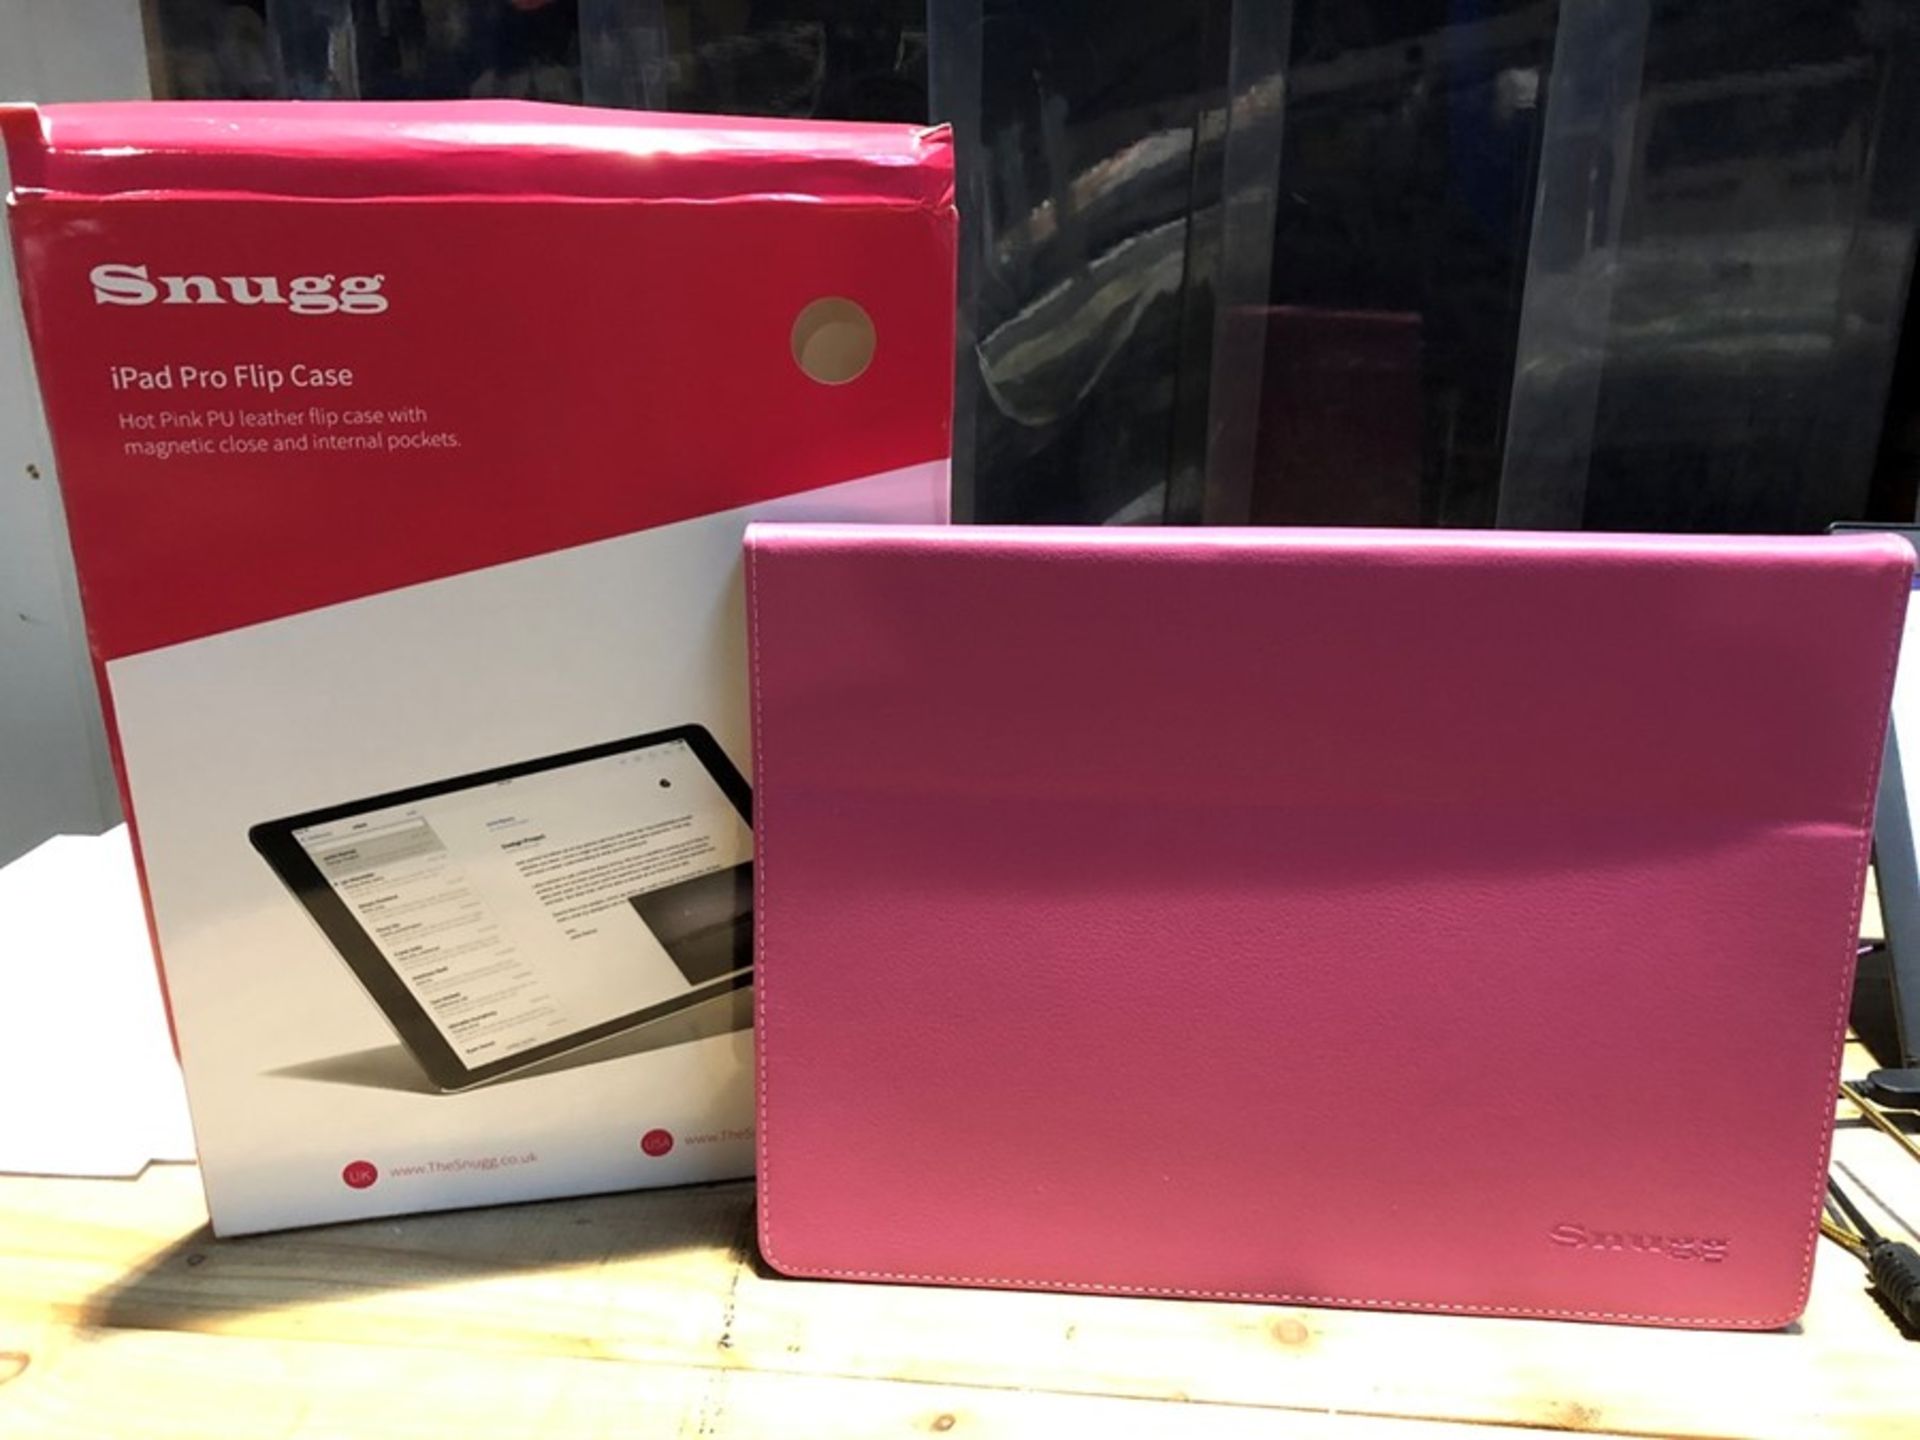 1 LOT TO CONTAIN 5 BOXED SNUGG IPAD PRO FLIP CASES 12.9 INCH IN PINK / RRP £124.95 (PUBLIC VIEWING